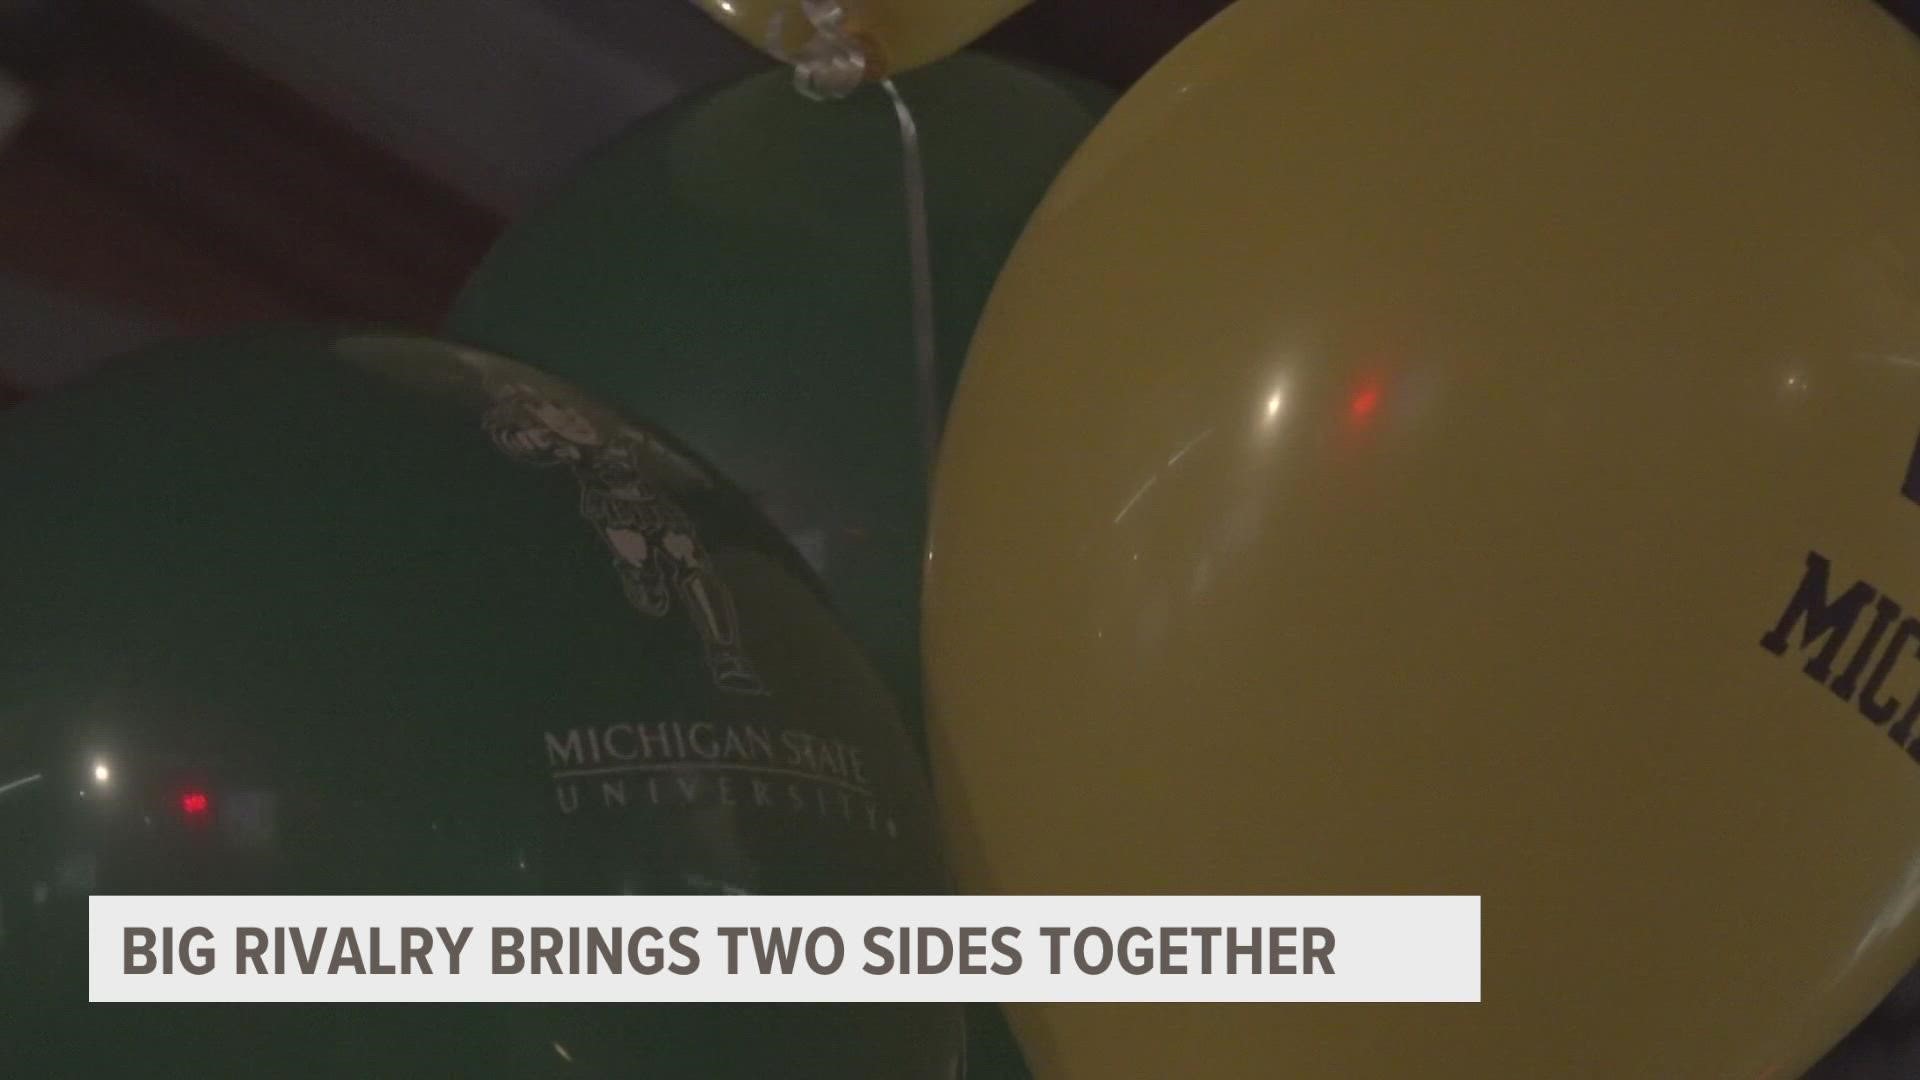 The state of Michigan comes together as fans to celebrate the historic, annual rivalry game between Michigan State and Michigan.